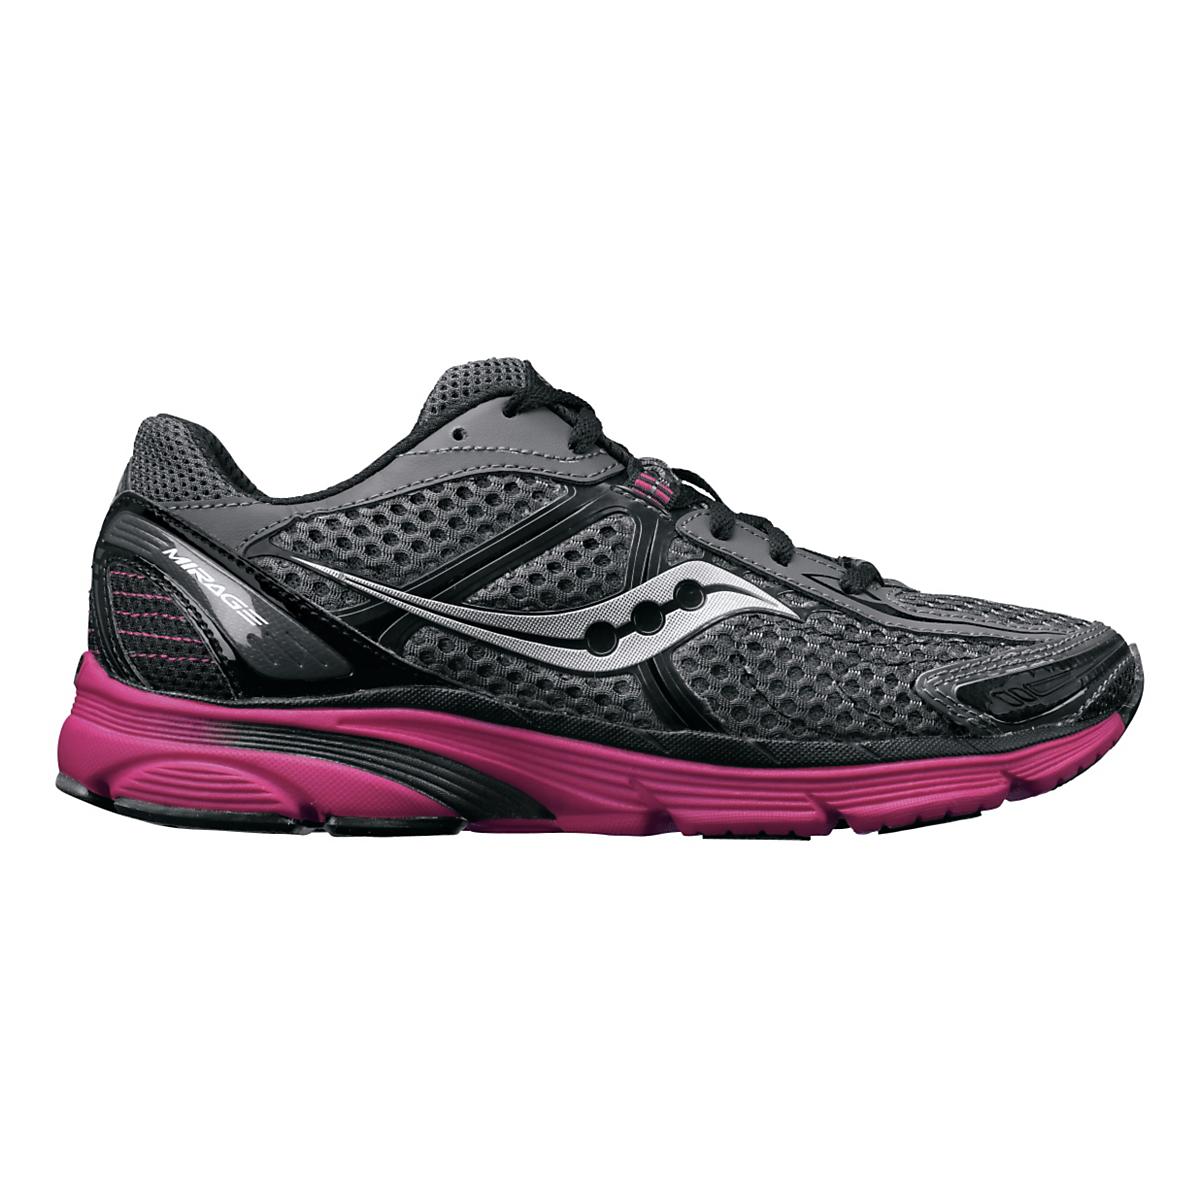 Womens Saucony ProGrid Mirage Running Shoe at Road Runner Sports